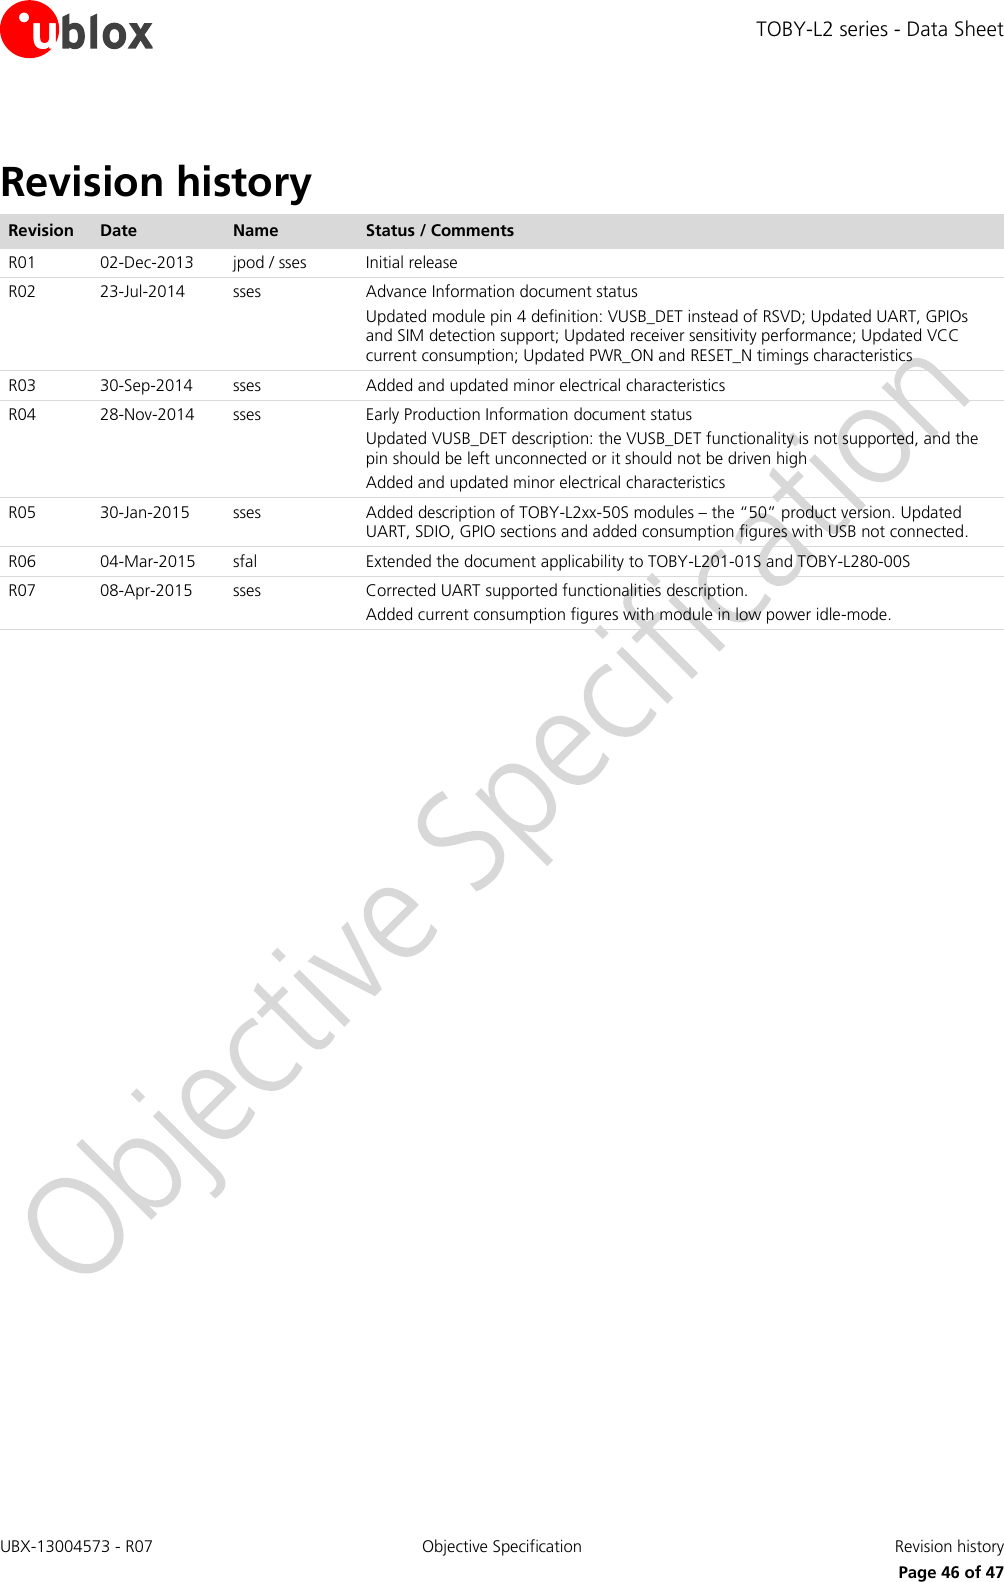 TOBY-L2 series - Data Sheet UBX-13004573 - R07  Objective Specification  Revision history   Page 46 of 47 Revision history Revision Date Name Status / Comments R01 02-Dec-2013 jpod / sses Initial release R02 23-Jul-2014 sses Advance Information document status  Updated module pin 4 definition: VUSB_DET instead of RSVD; Updated UART, GPIOs and SIM detection support; Updated receiver sensitivity performance; Updated VCC current consumption; Updated PWR_ON and RESET_N timings characteristics R03 30-Sep-2014 sses Added and updated minor electrical characteristics R04 28-Nov-2014 sses Early Production Information document status Updated VUSB_DET description: the VUSB_DET functionality is not supported, and the pin should be left unconnected or it should not be driven high  Added and updated minor electrical characteristics R05 30-Jan-2015 sses Added description of TOBY-L2xx-50S modules – the “50” product version. Updated UART, SDIO, GPIO sections and added consumption figures with USB not connected. R06 04-Mar-2015 sfal Extended the document applicability to TOBY-L201-01S and TOBY-L280-00S R07 08-Apr-2015 sses Corrected UART supported functionalities description. Added current consumption figures with module in low power idle-mode. 